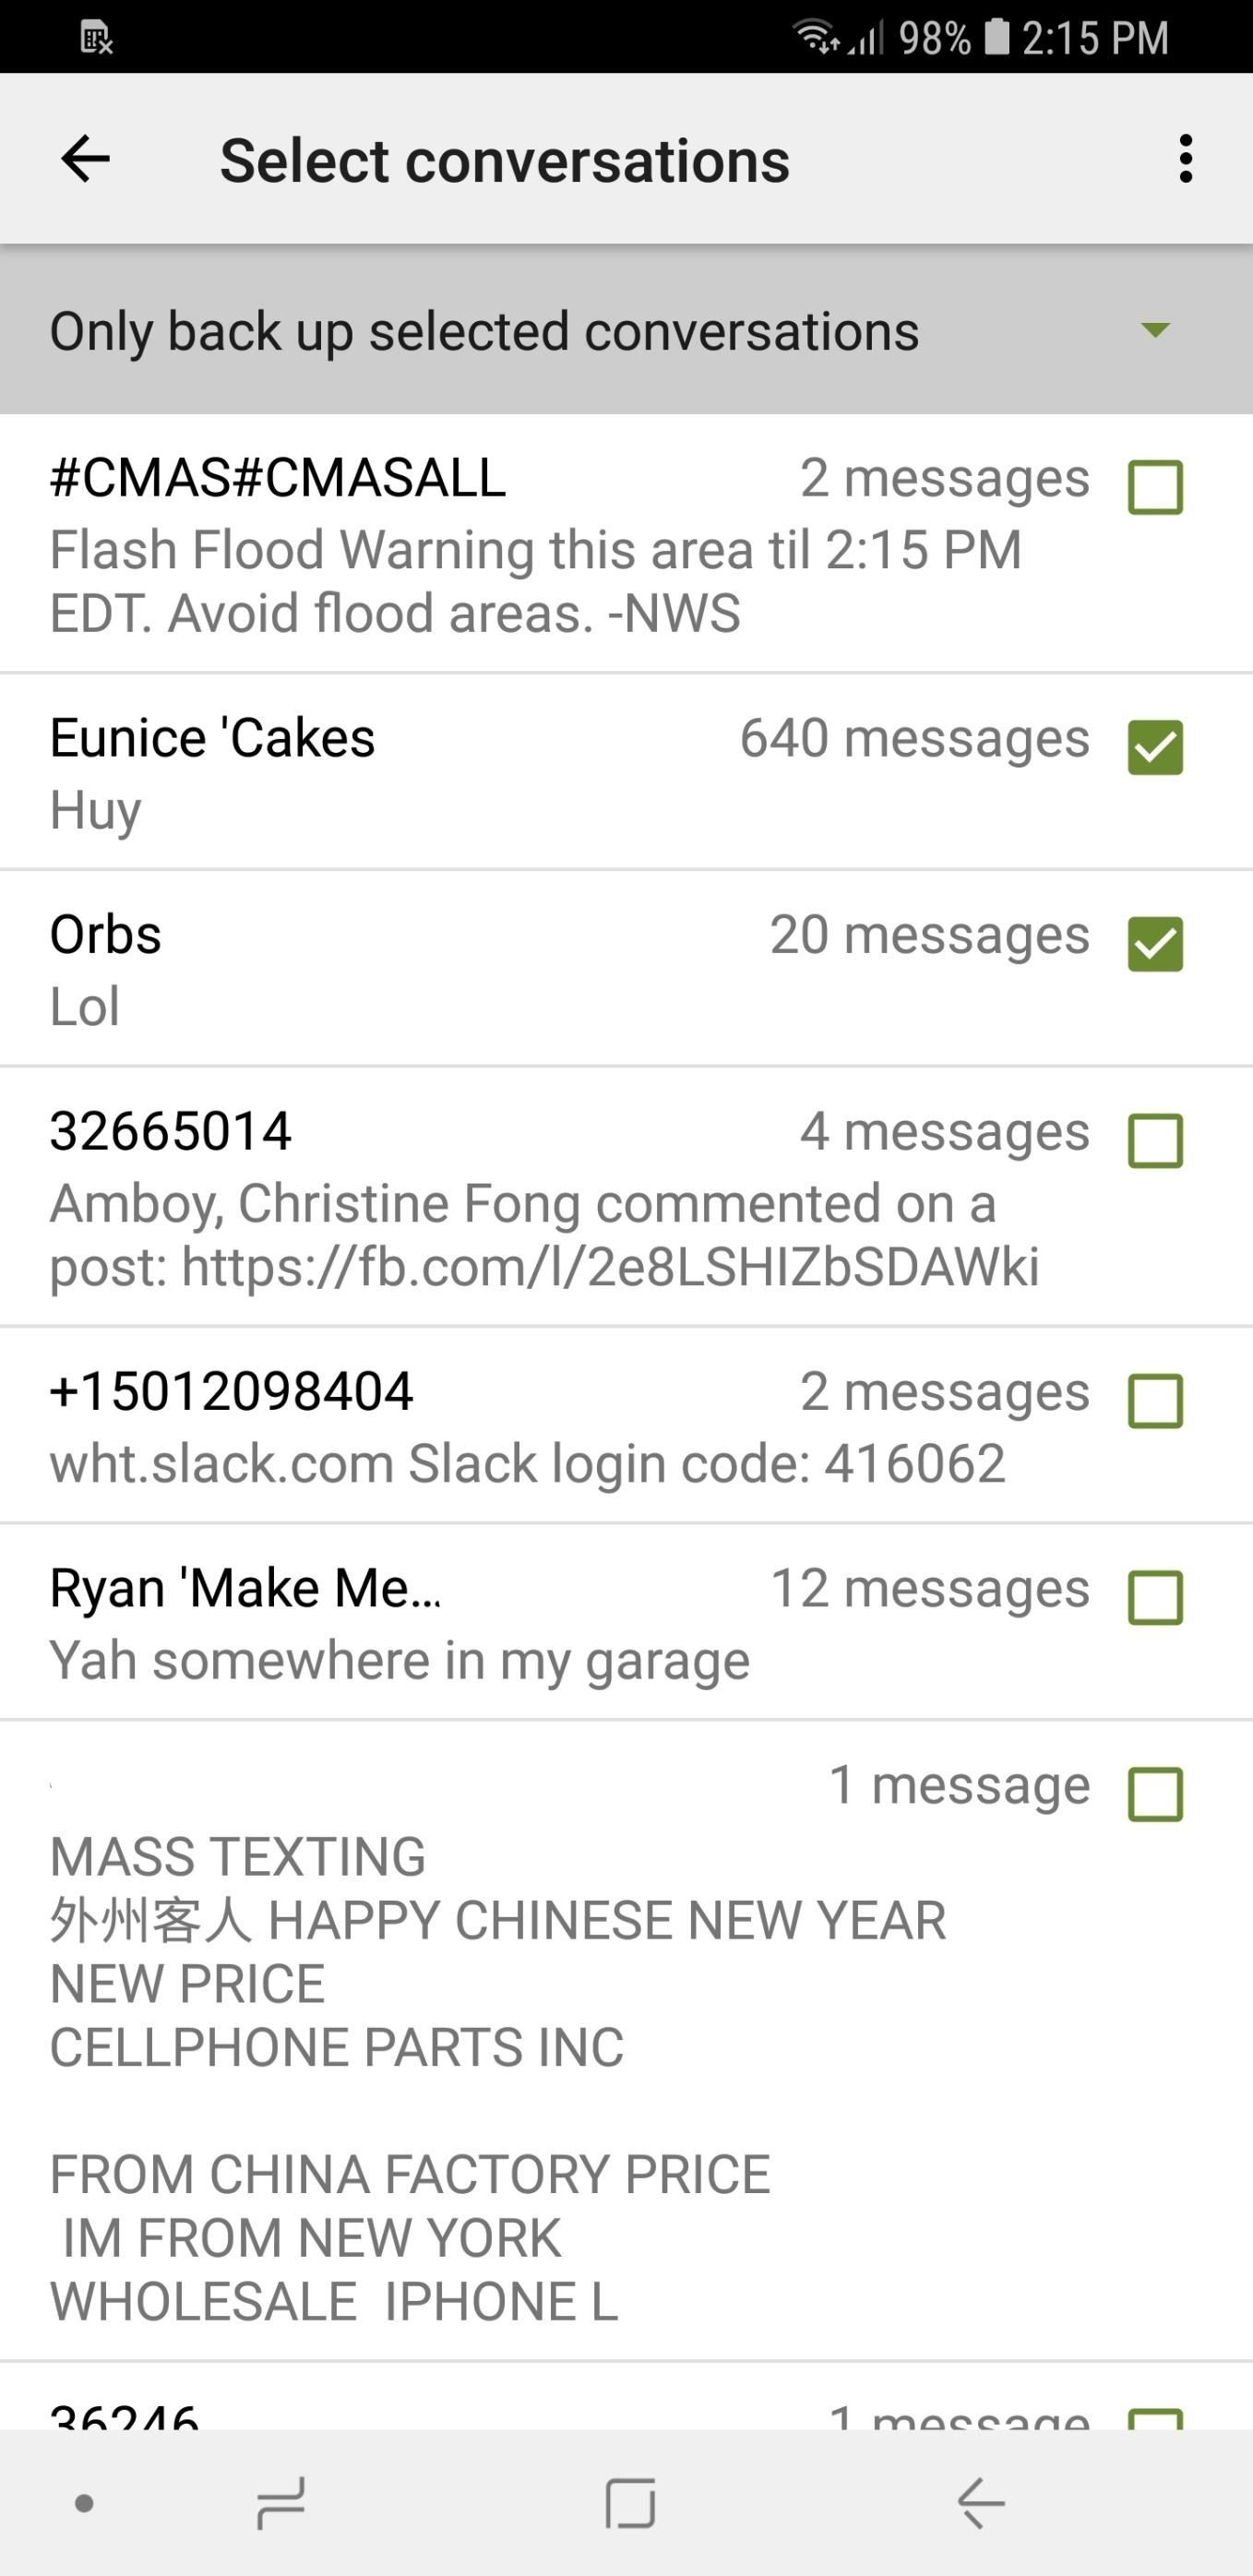 How to Extract & Back Up All of Your Text Messages on Android